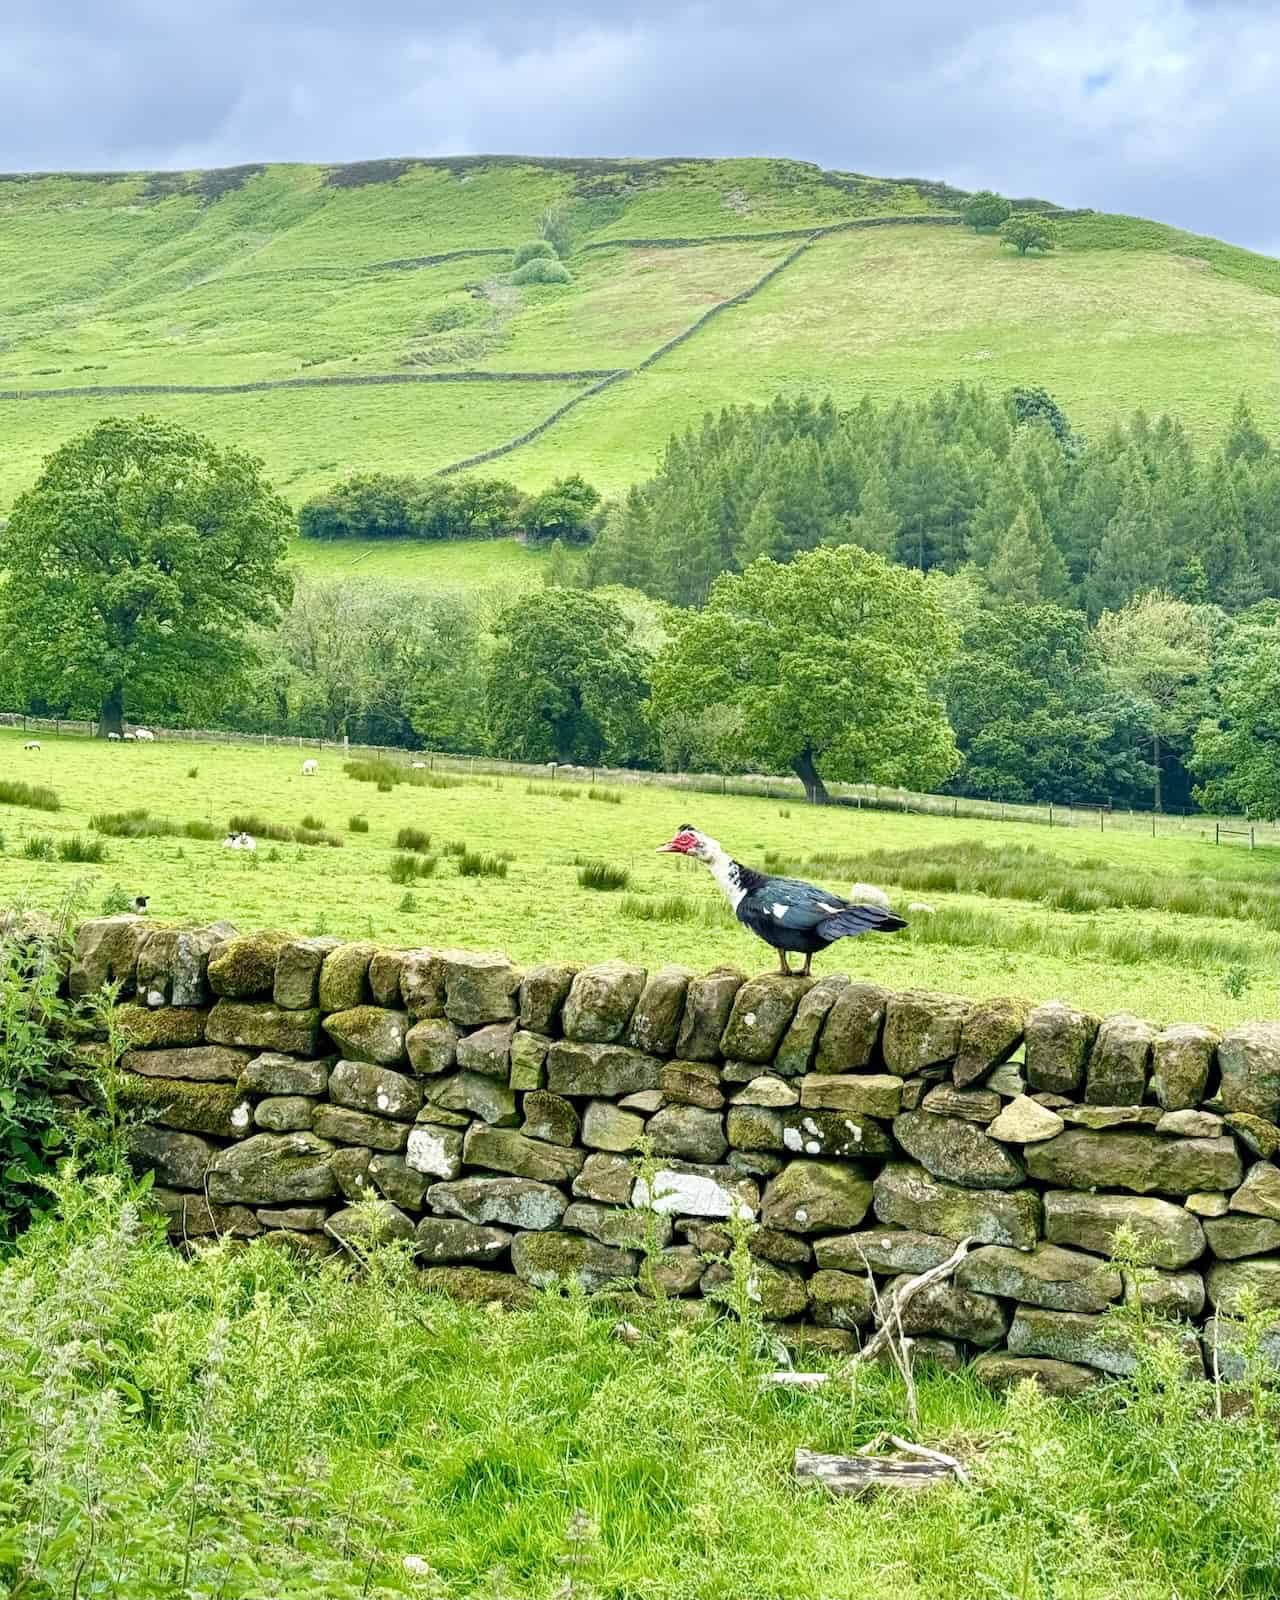 View from Scarth Nick across West Gill valley towards Horn Ridge, with a Muscovy duck perched on a dry stone wall.
